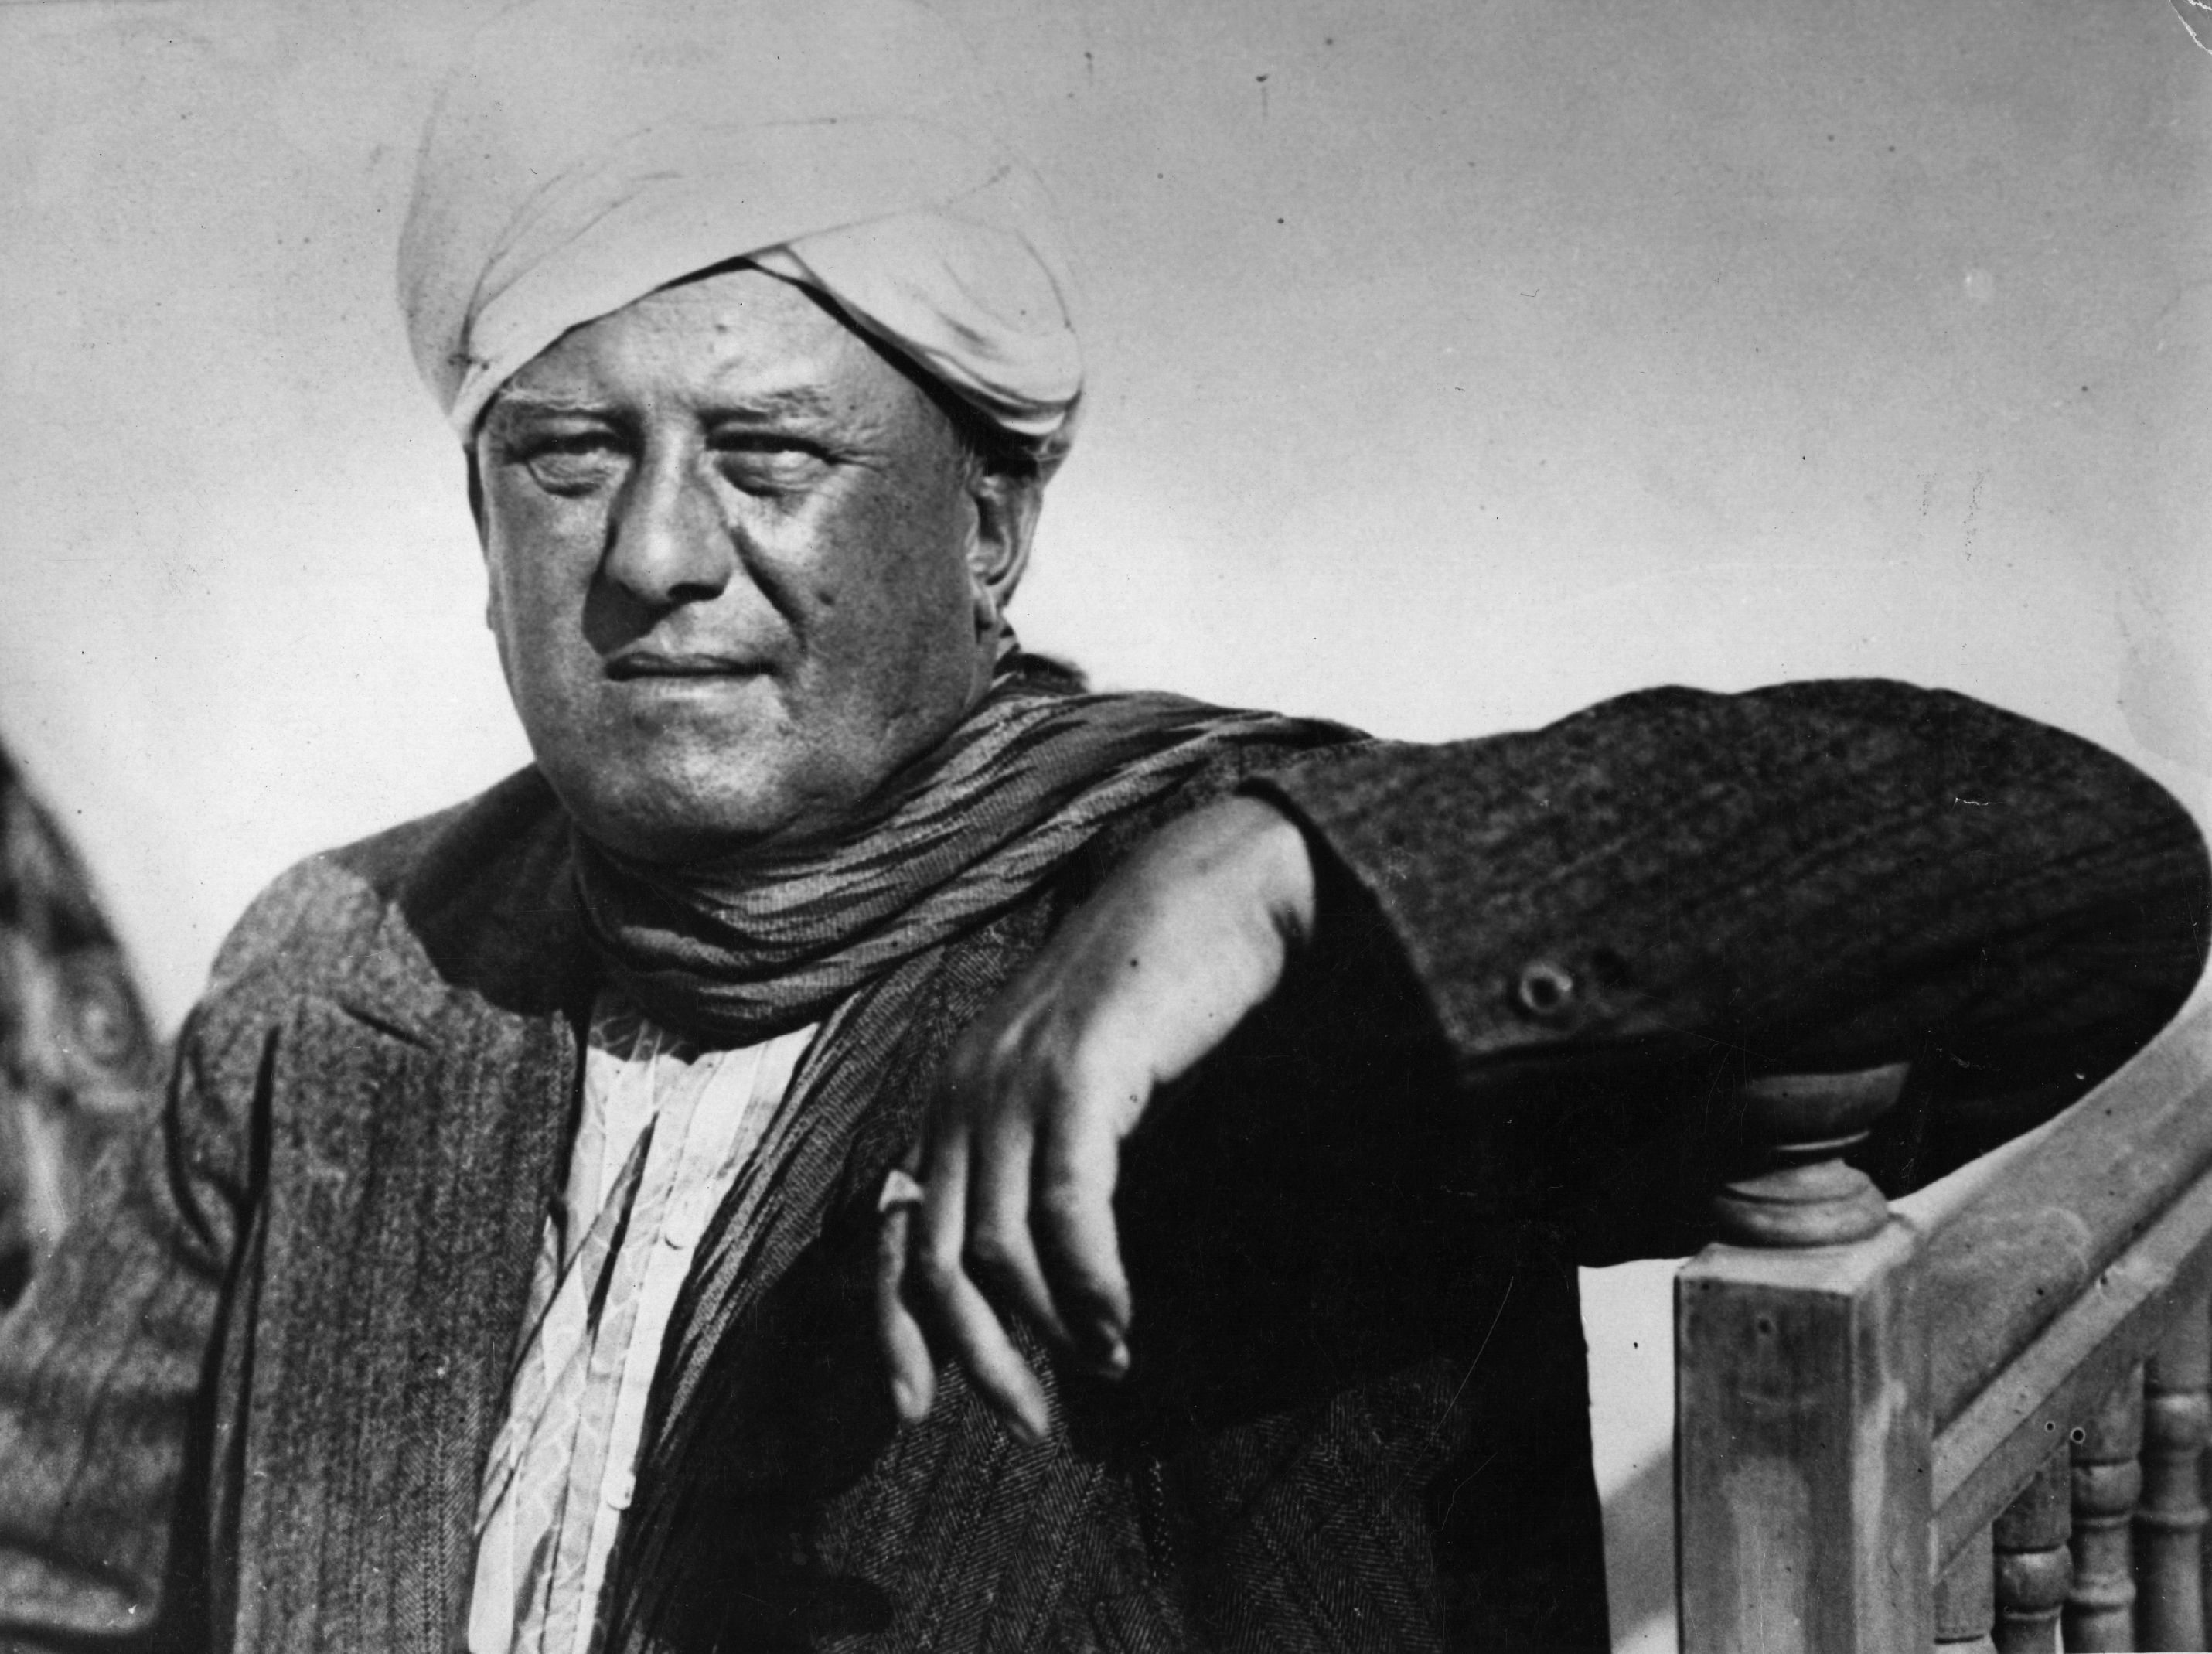 Aleister Crowley wearing a turban